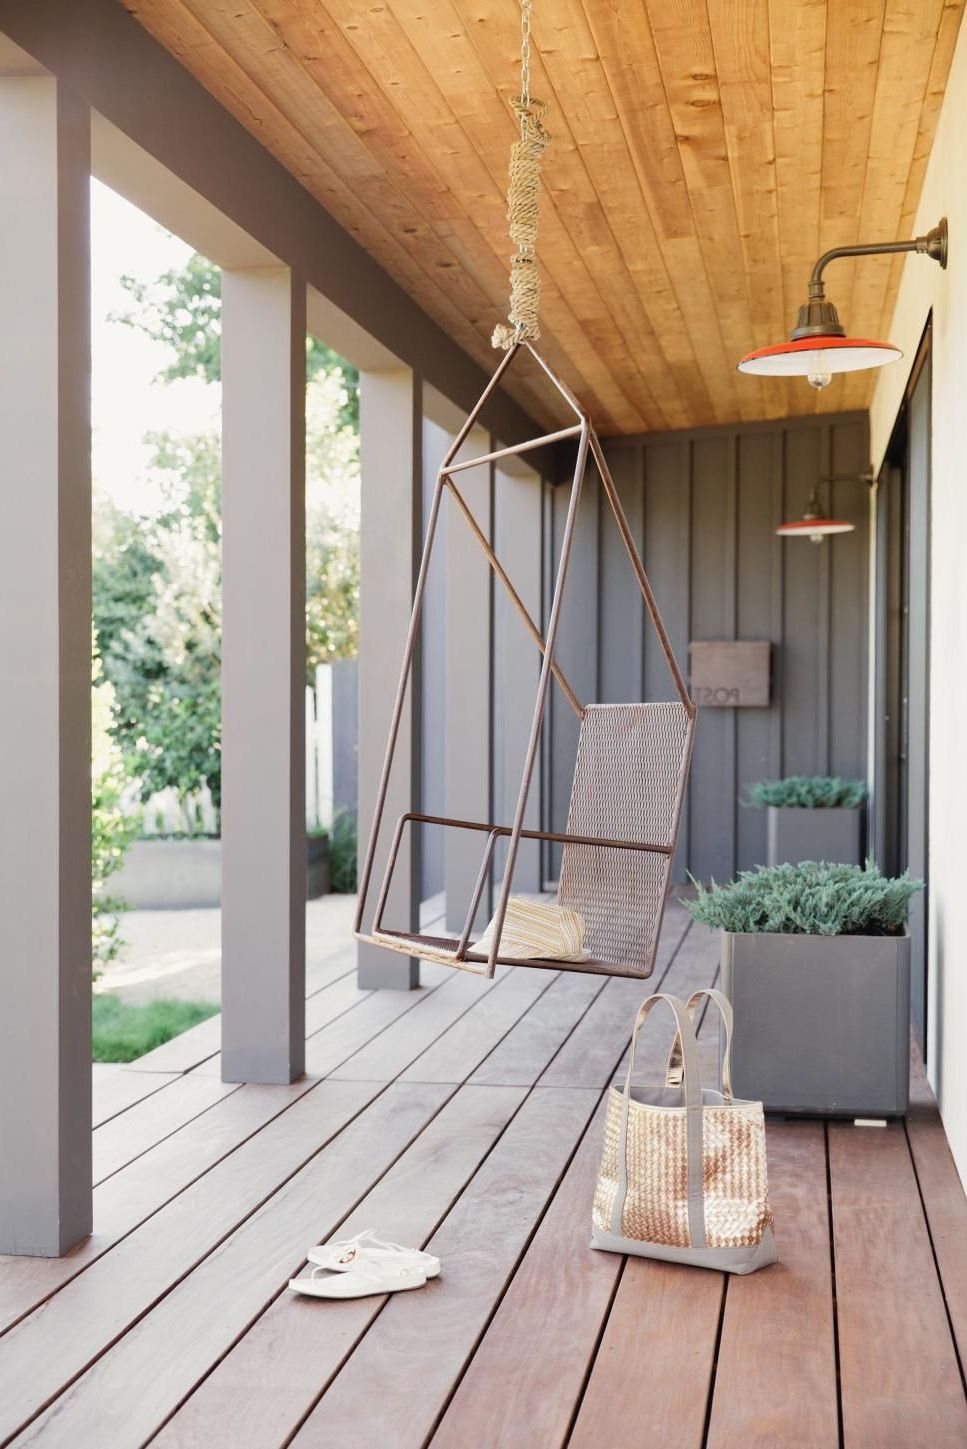 Fashionable A Modern Metal Swing Hangs From The Wood Plank Ceiling On Pertaining To Lamp Outdoor Porch Swings (View 8 of 30)